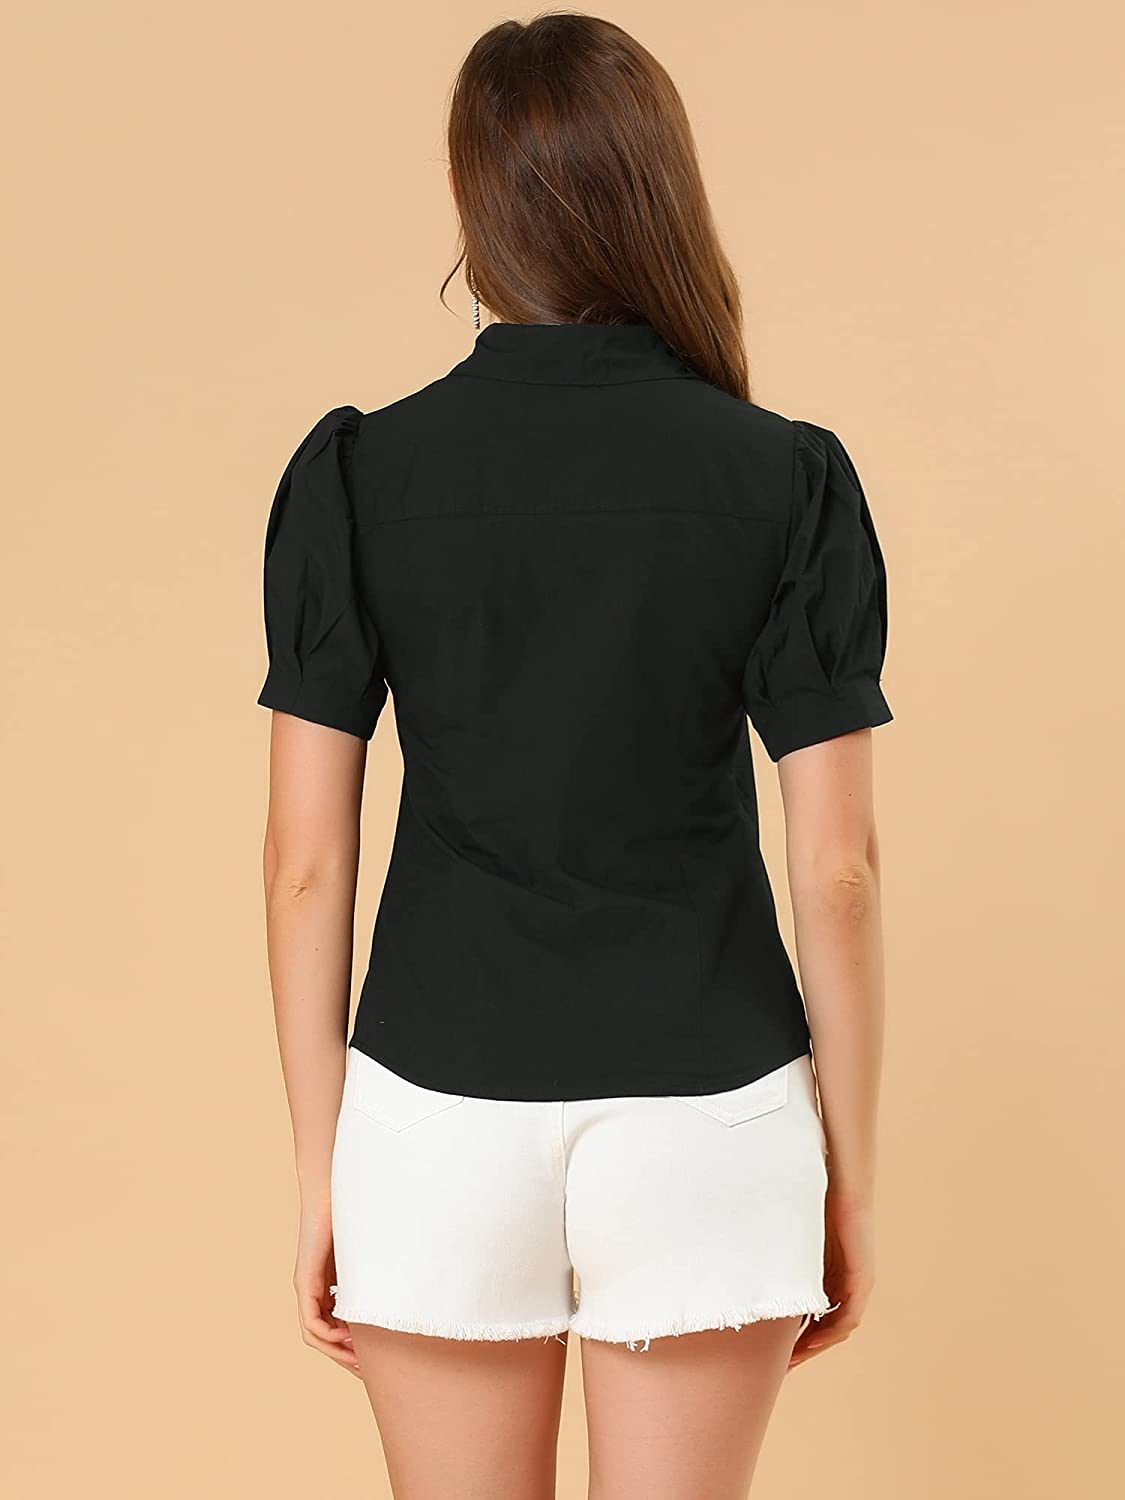 Solid Black Shirt for women